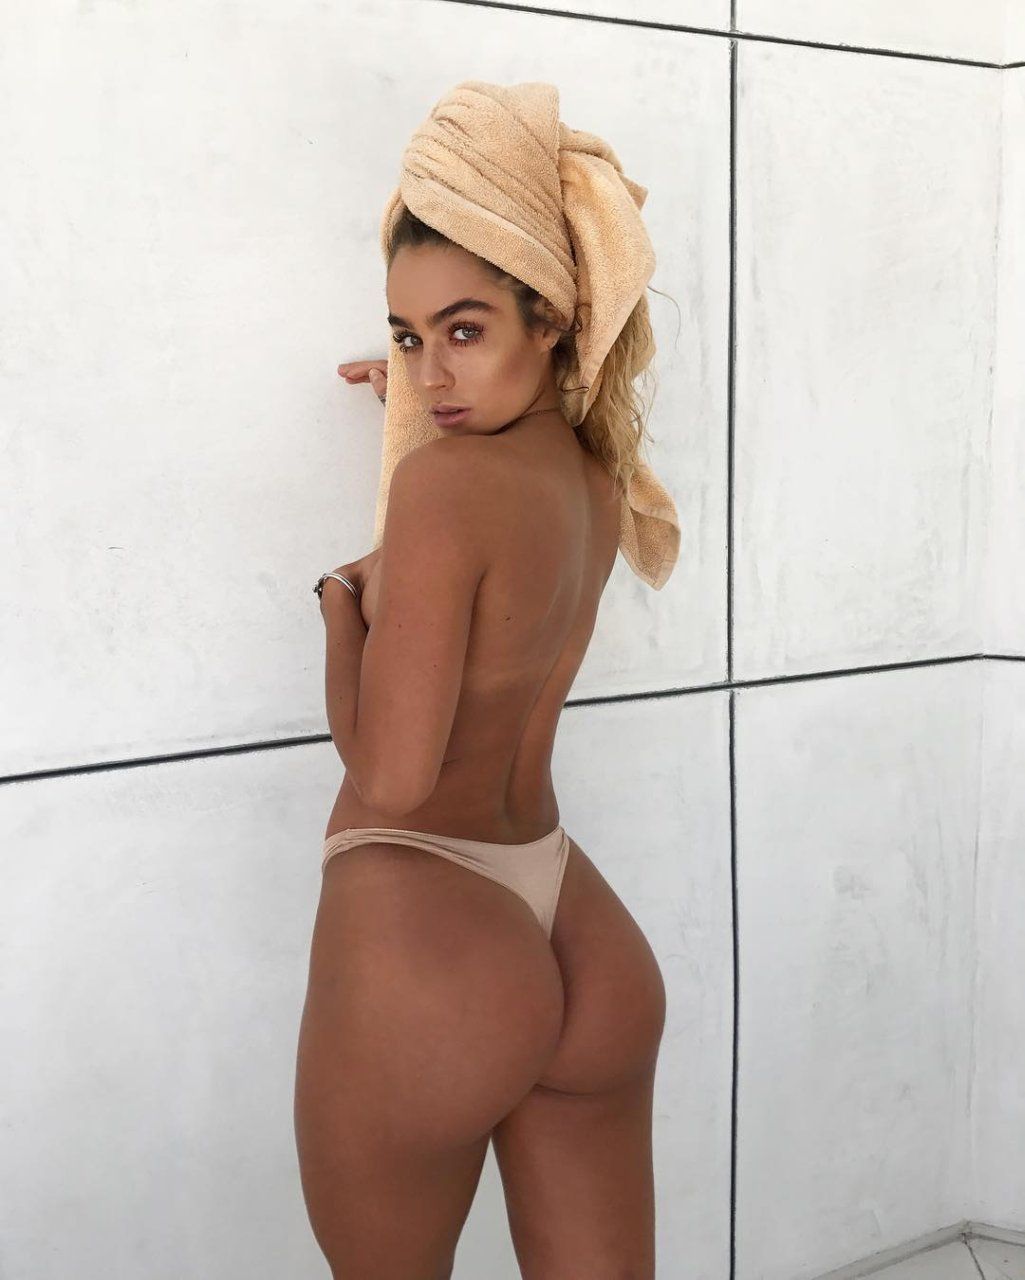 Sommer Ray fap challenge/ try not to cum challenge.